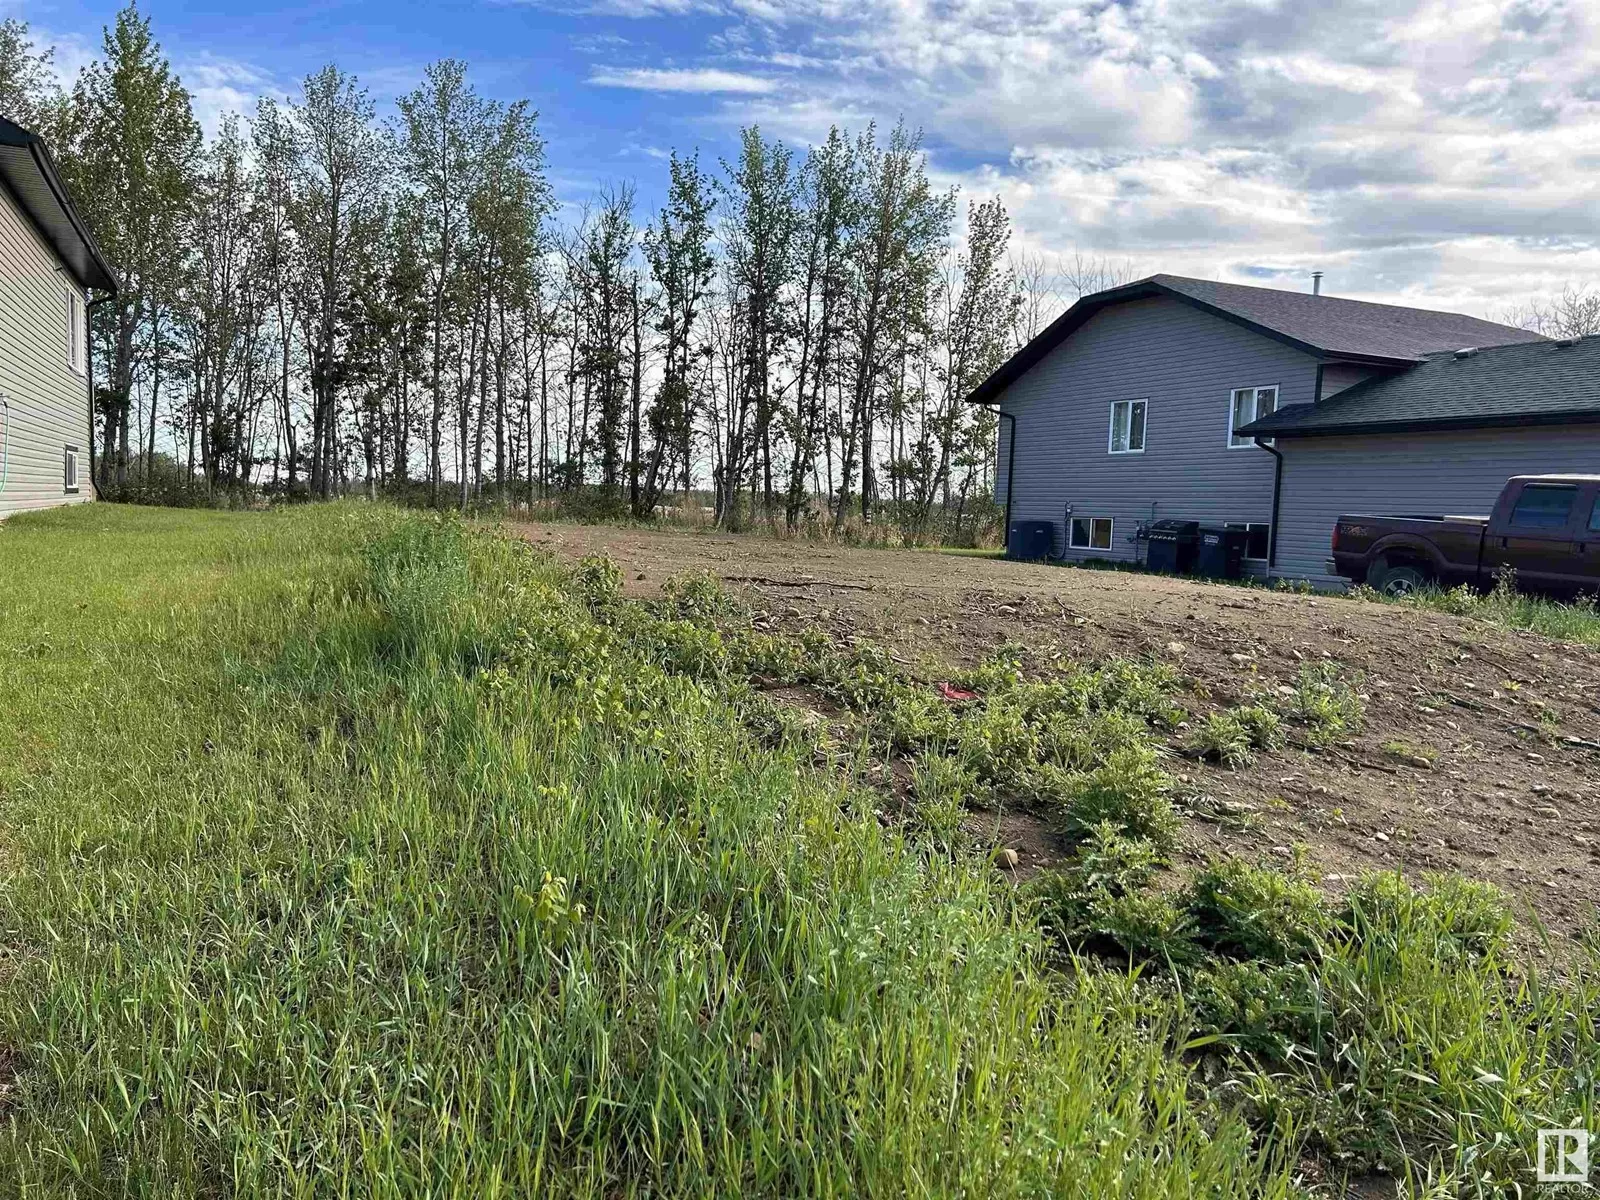 No Building for rent: 6111 53 A Av, Redwater, Alberta T0A 2W0